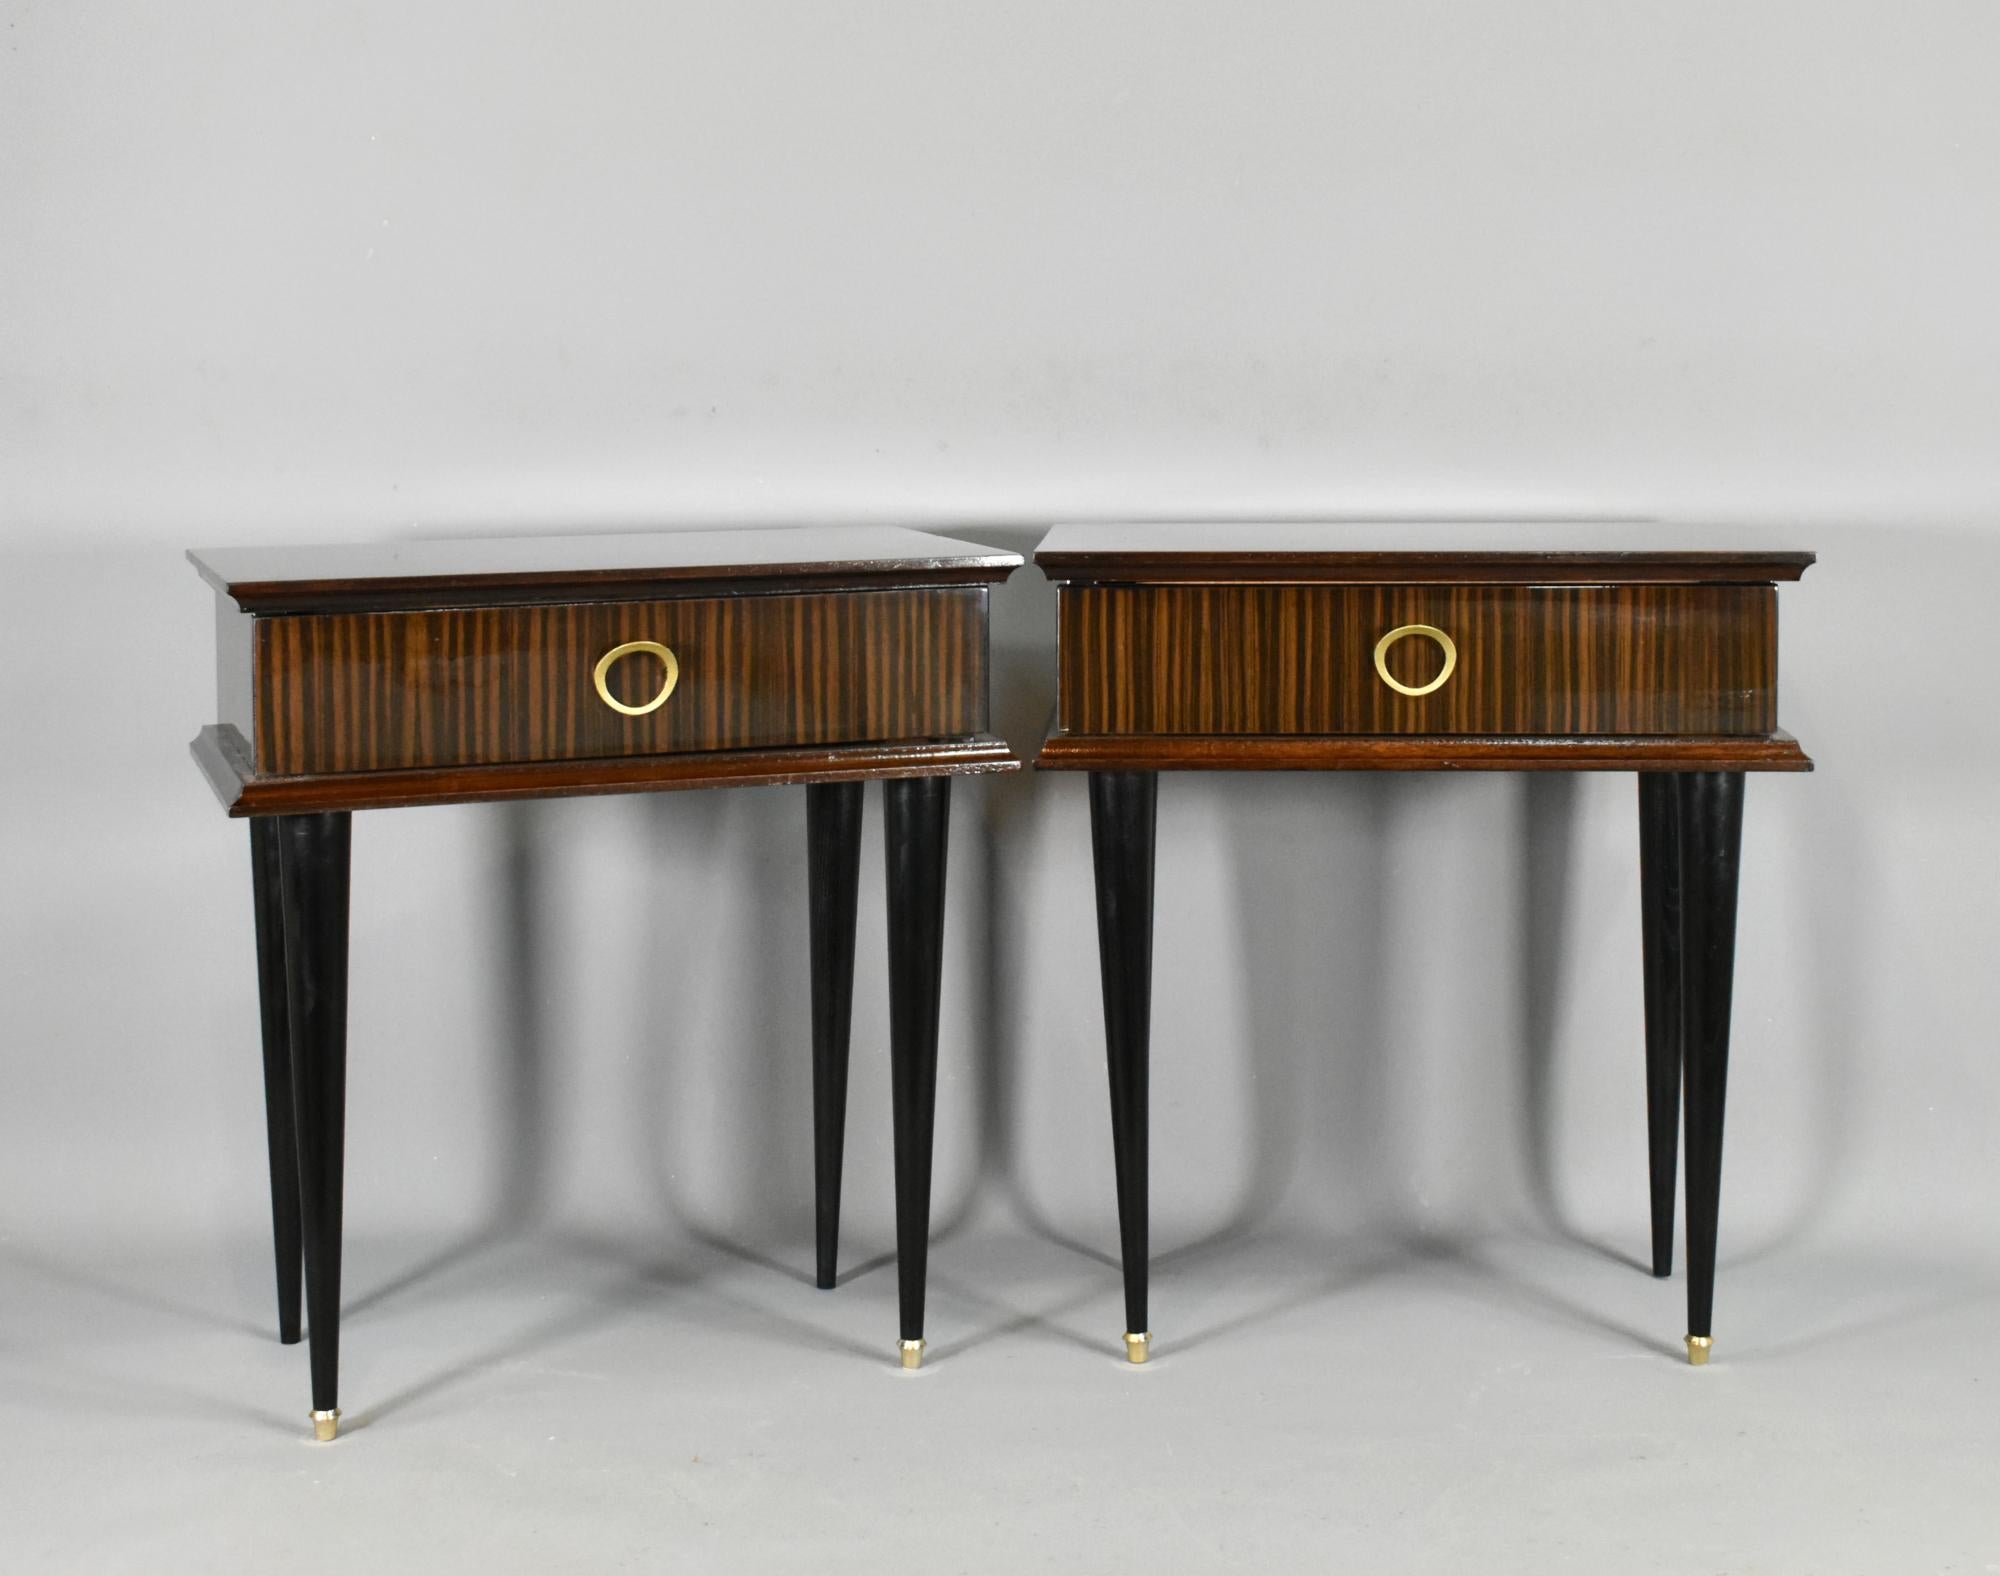 Pair of French 1970s Night Stands in Macassar Ebony 

A pair of matching 1970s Night Stands in Macassar Ebony standing on turned tapered legs with gold-coloured feet to the front legs. 

Both the full-width drawers feature a gilt metal drawer pull